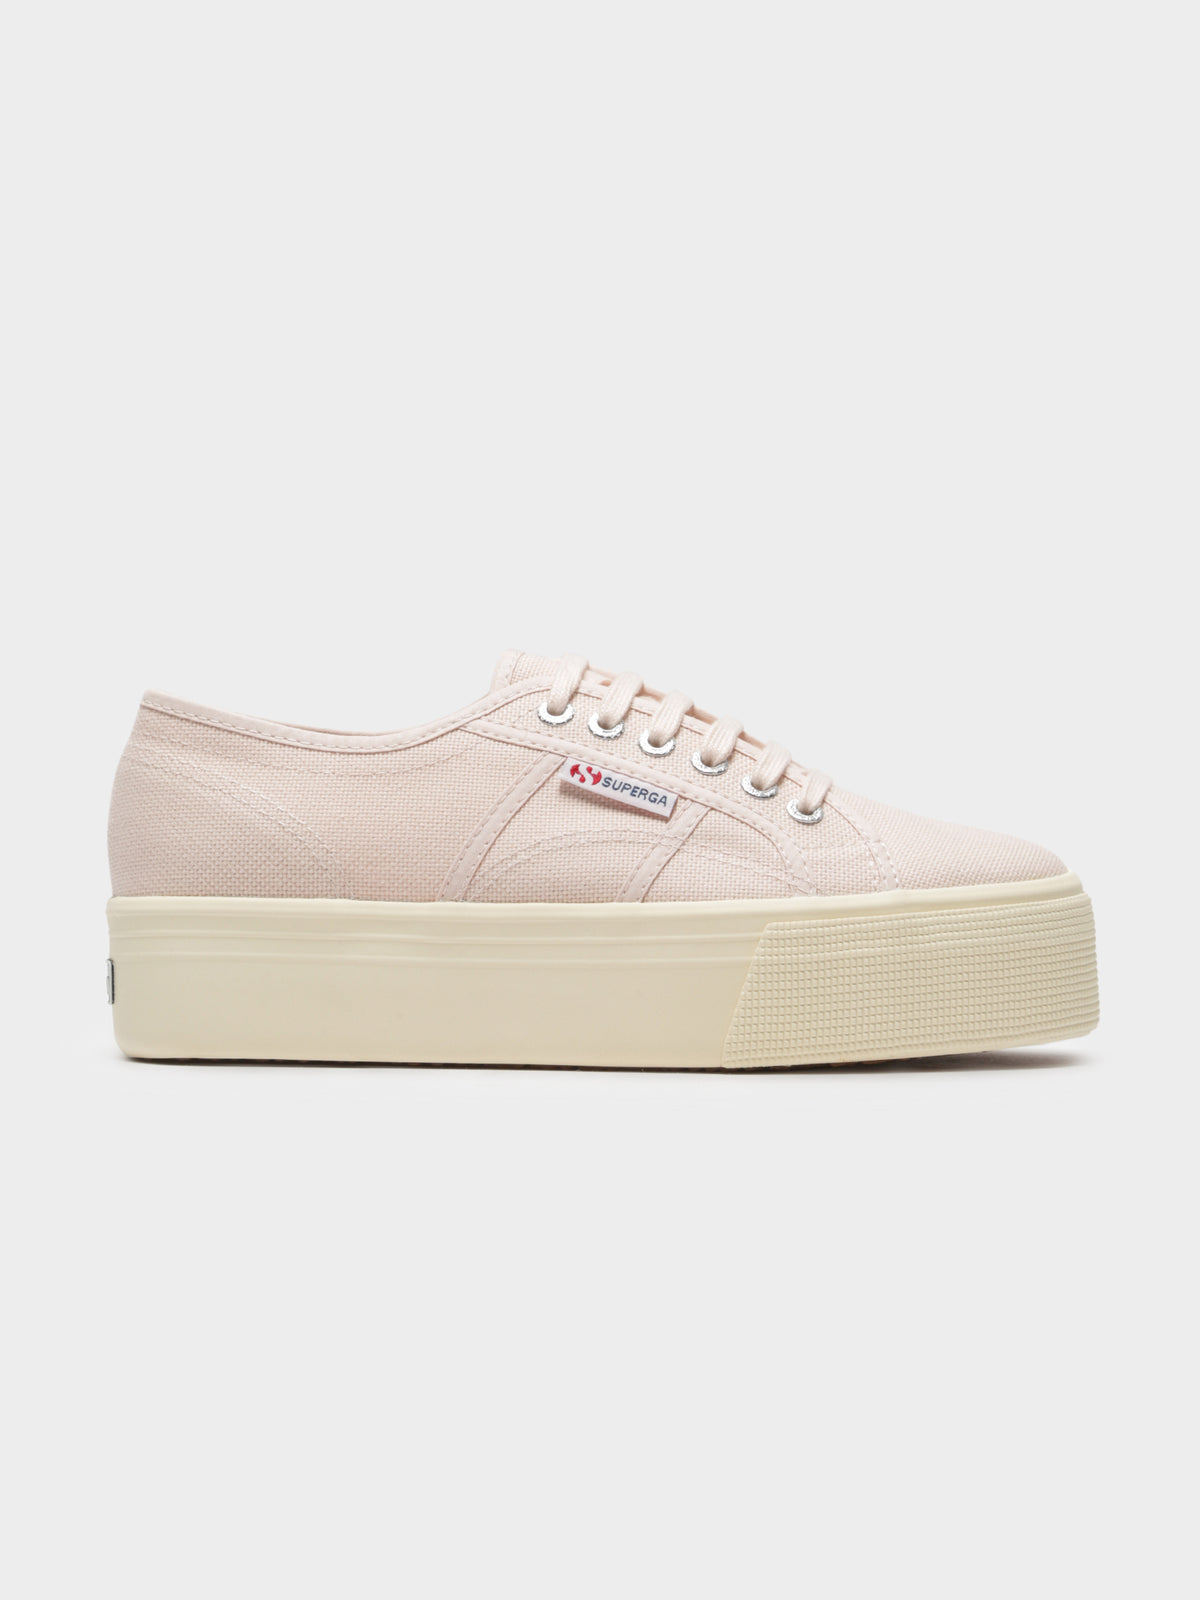 Womens 2790 Acotw Linea Up And Down Platform Sneakers in Pink Peach &amp; Off White